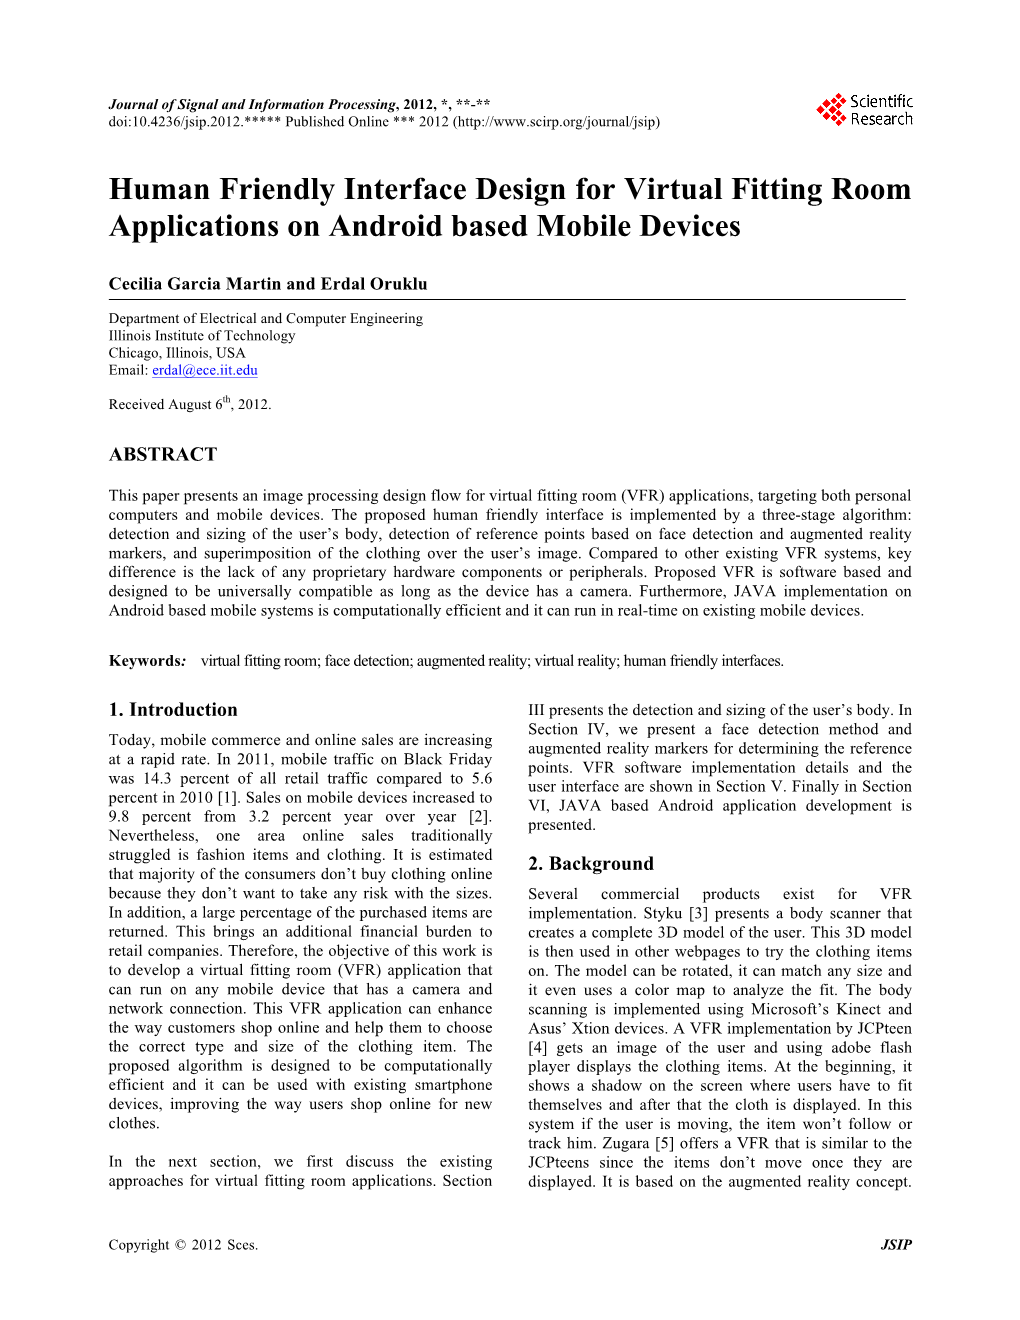 Human Friendly Interface Design for Virtual Fitting Room Applications on Android Based Mobile Devices